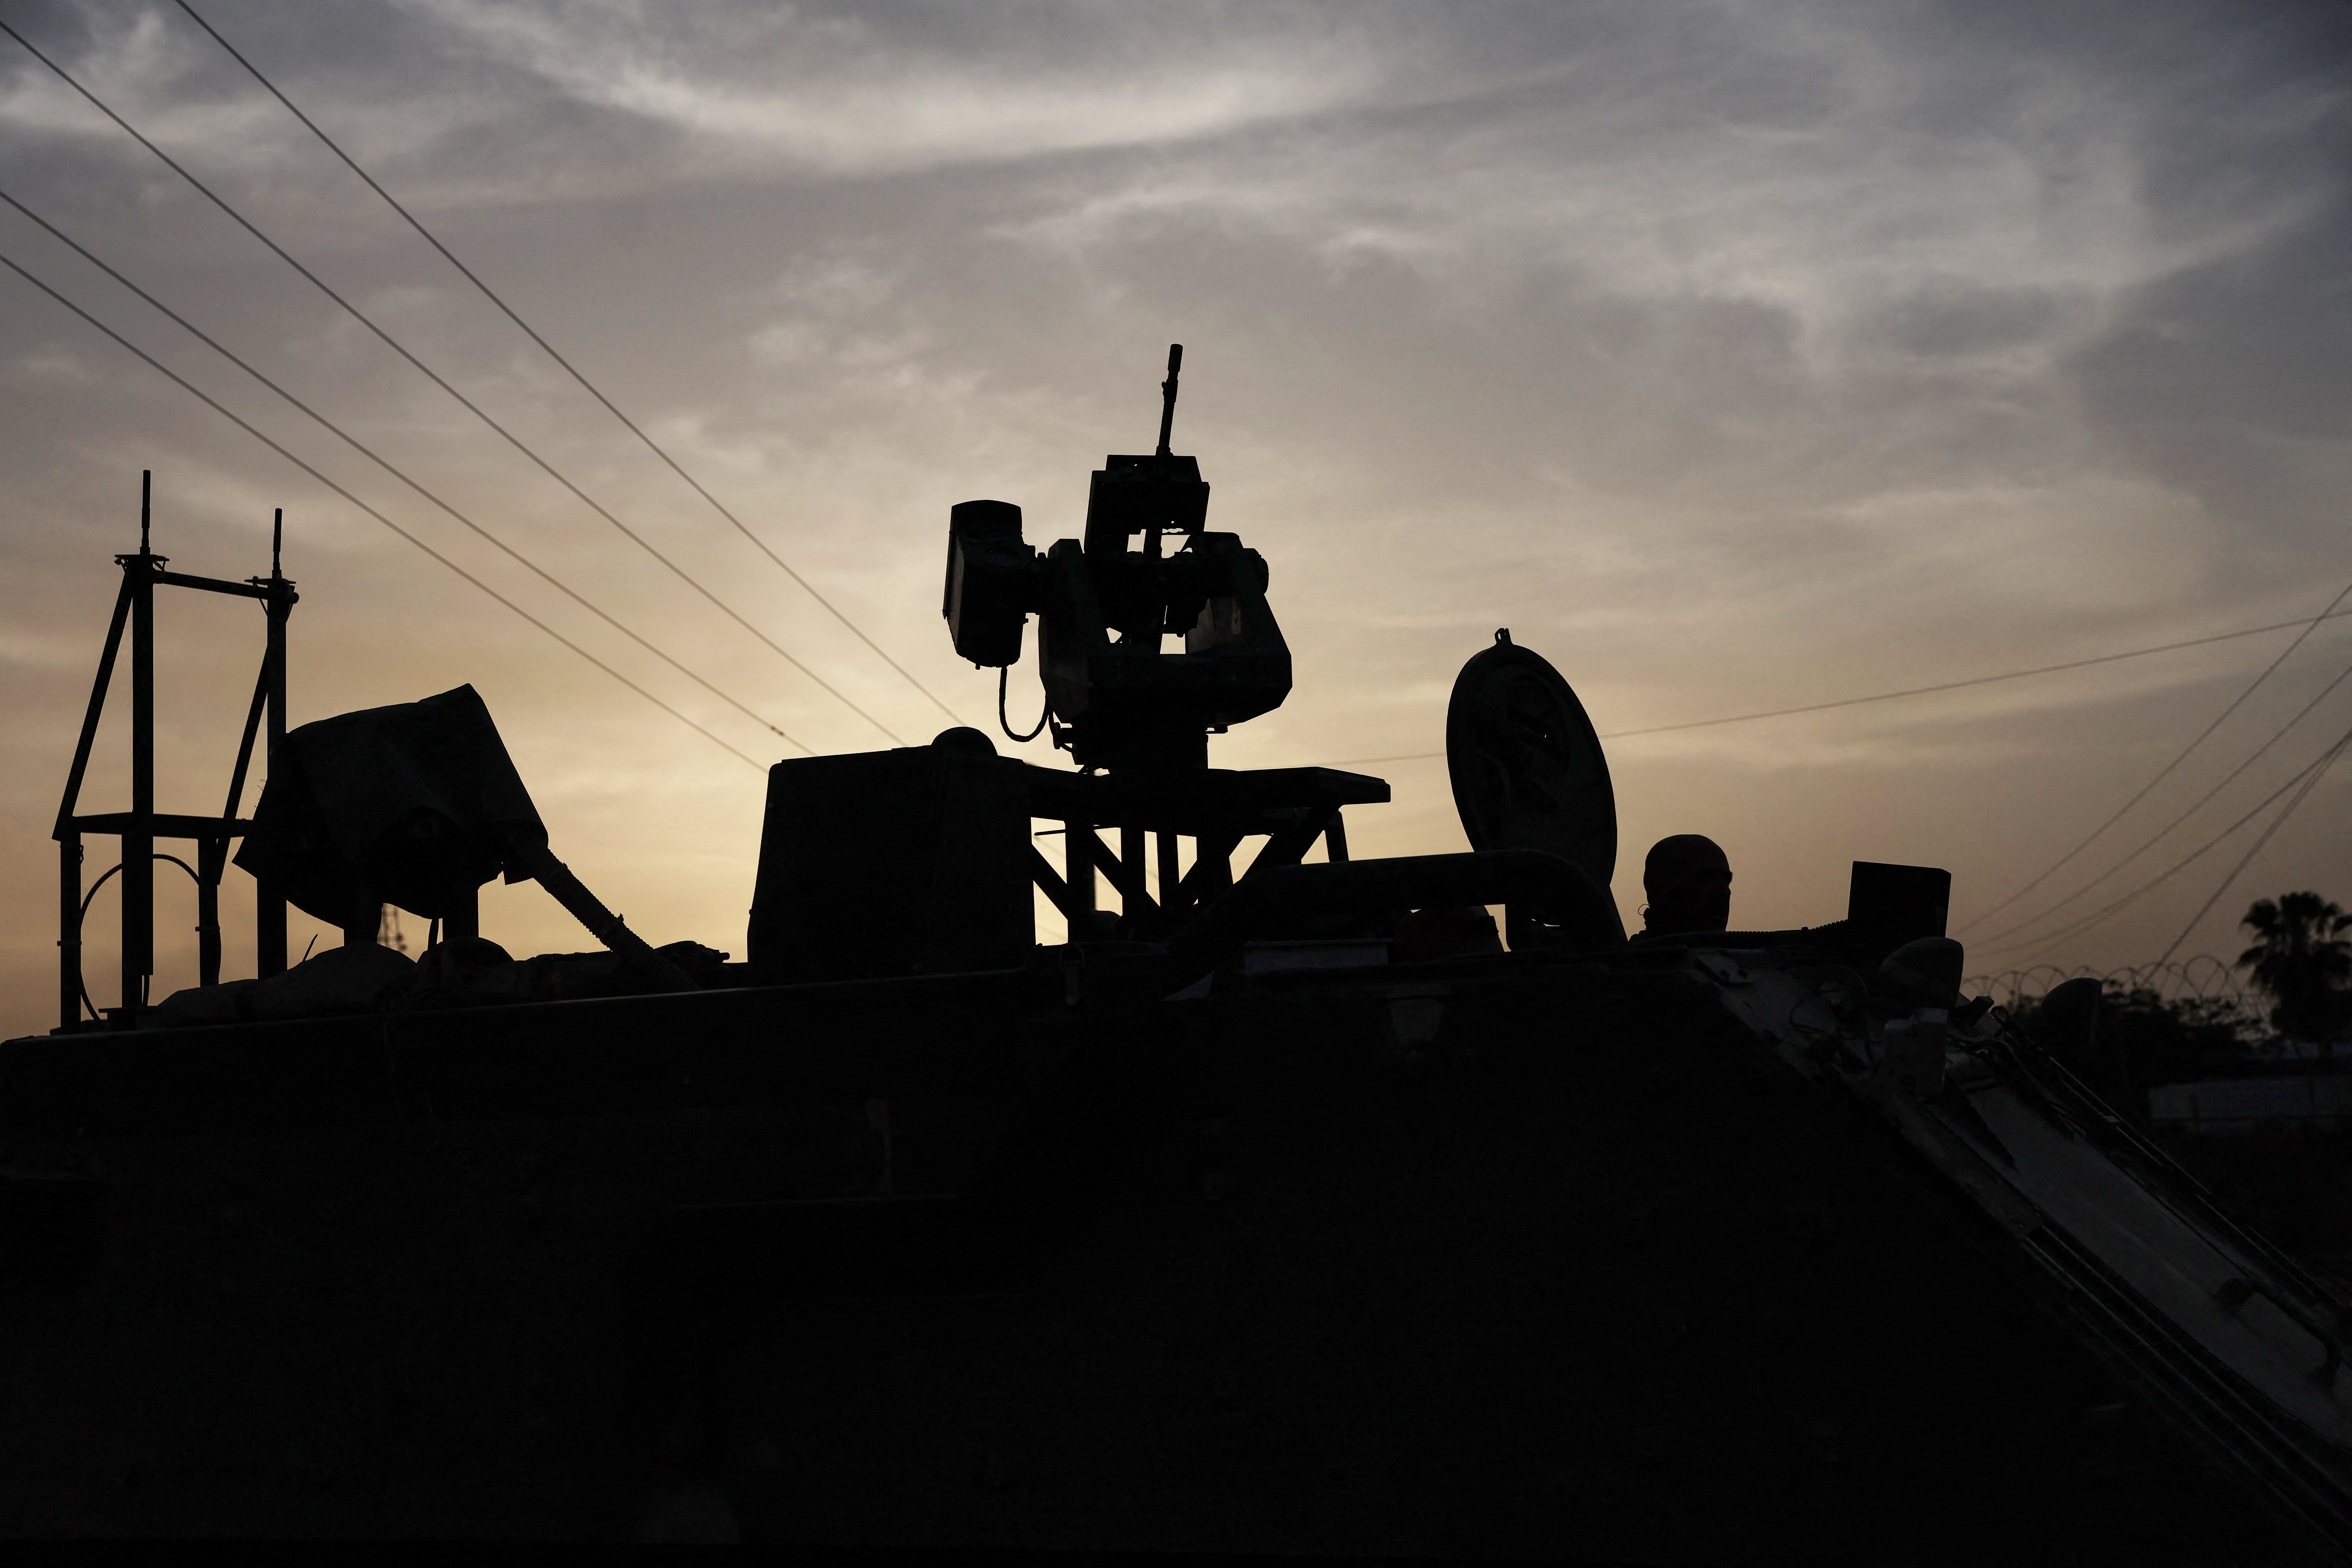 An Israeli solider is seen in silhouette inside an armored personnel carrier, as military operations continue in the southern Gaza city of Rafah, at an area outside Kerem Shalom, Israe